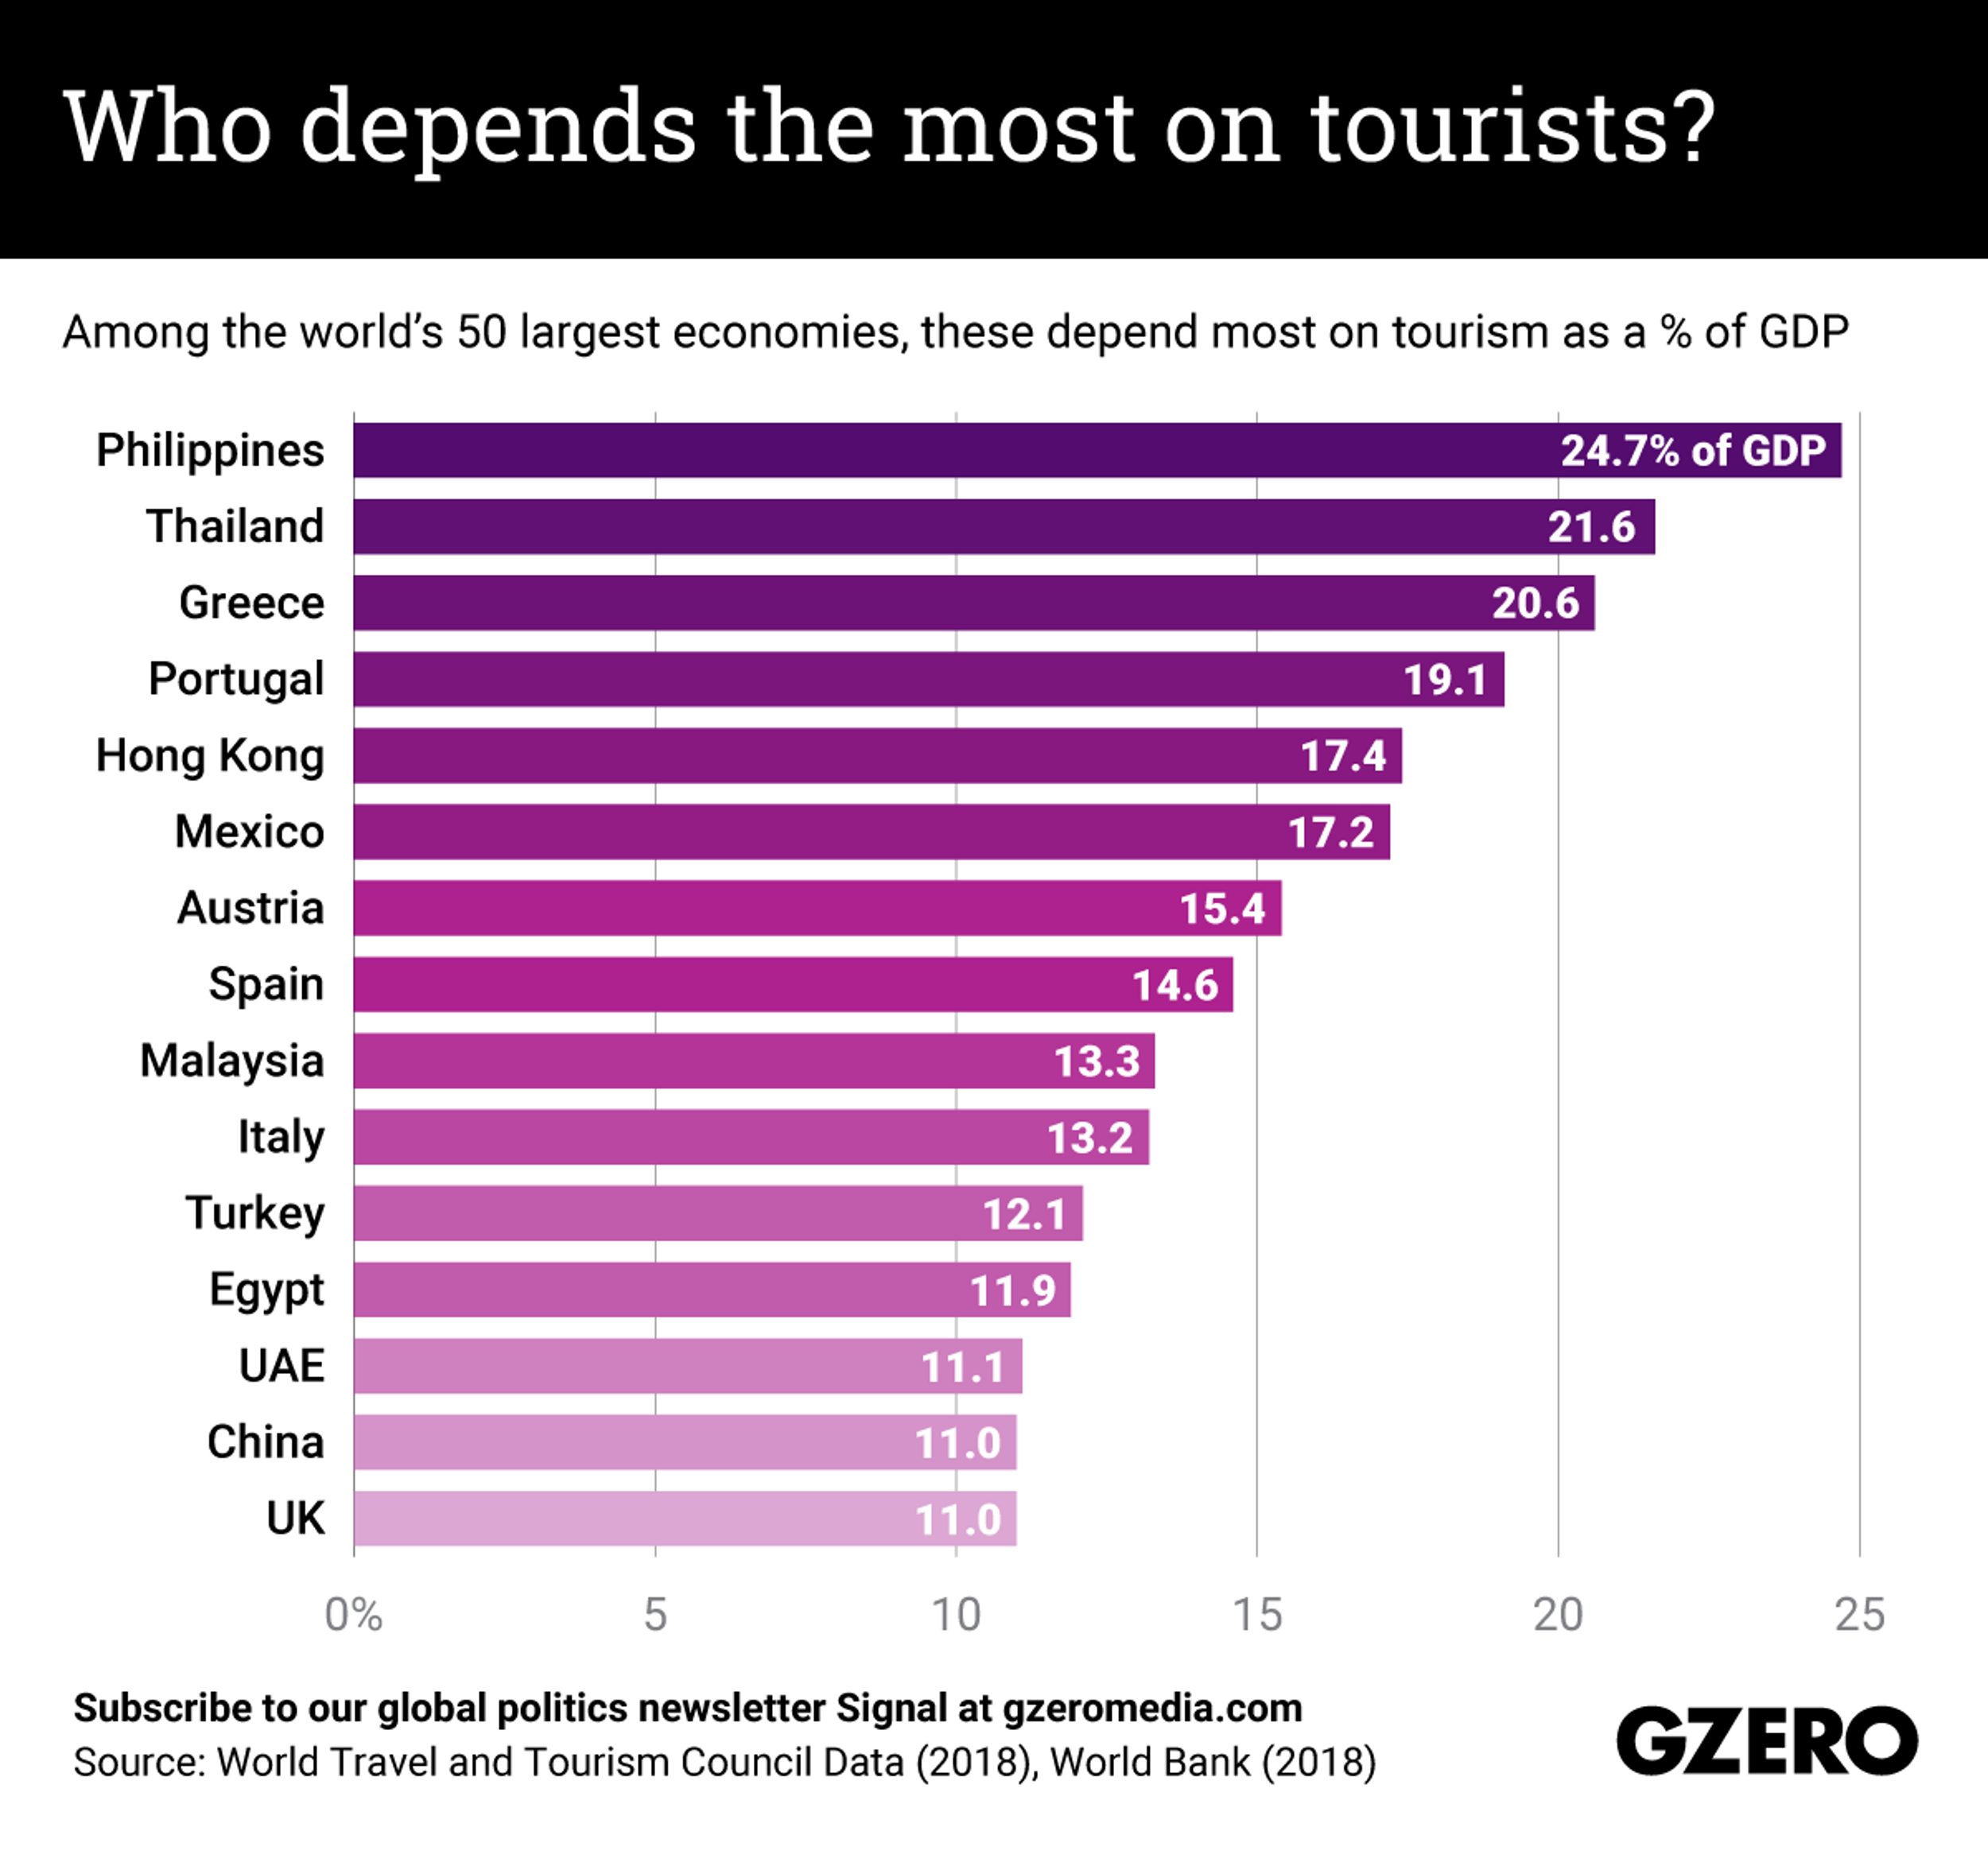 The Graphic Truth: Who depends the most on tourists?